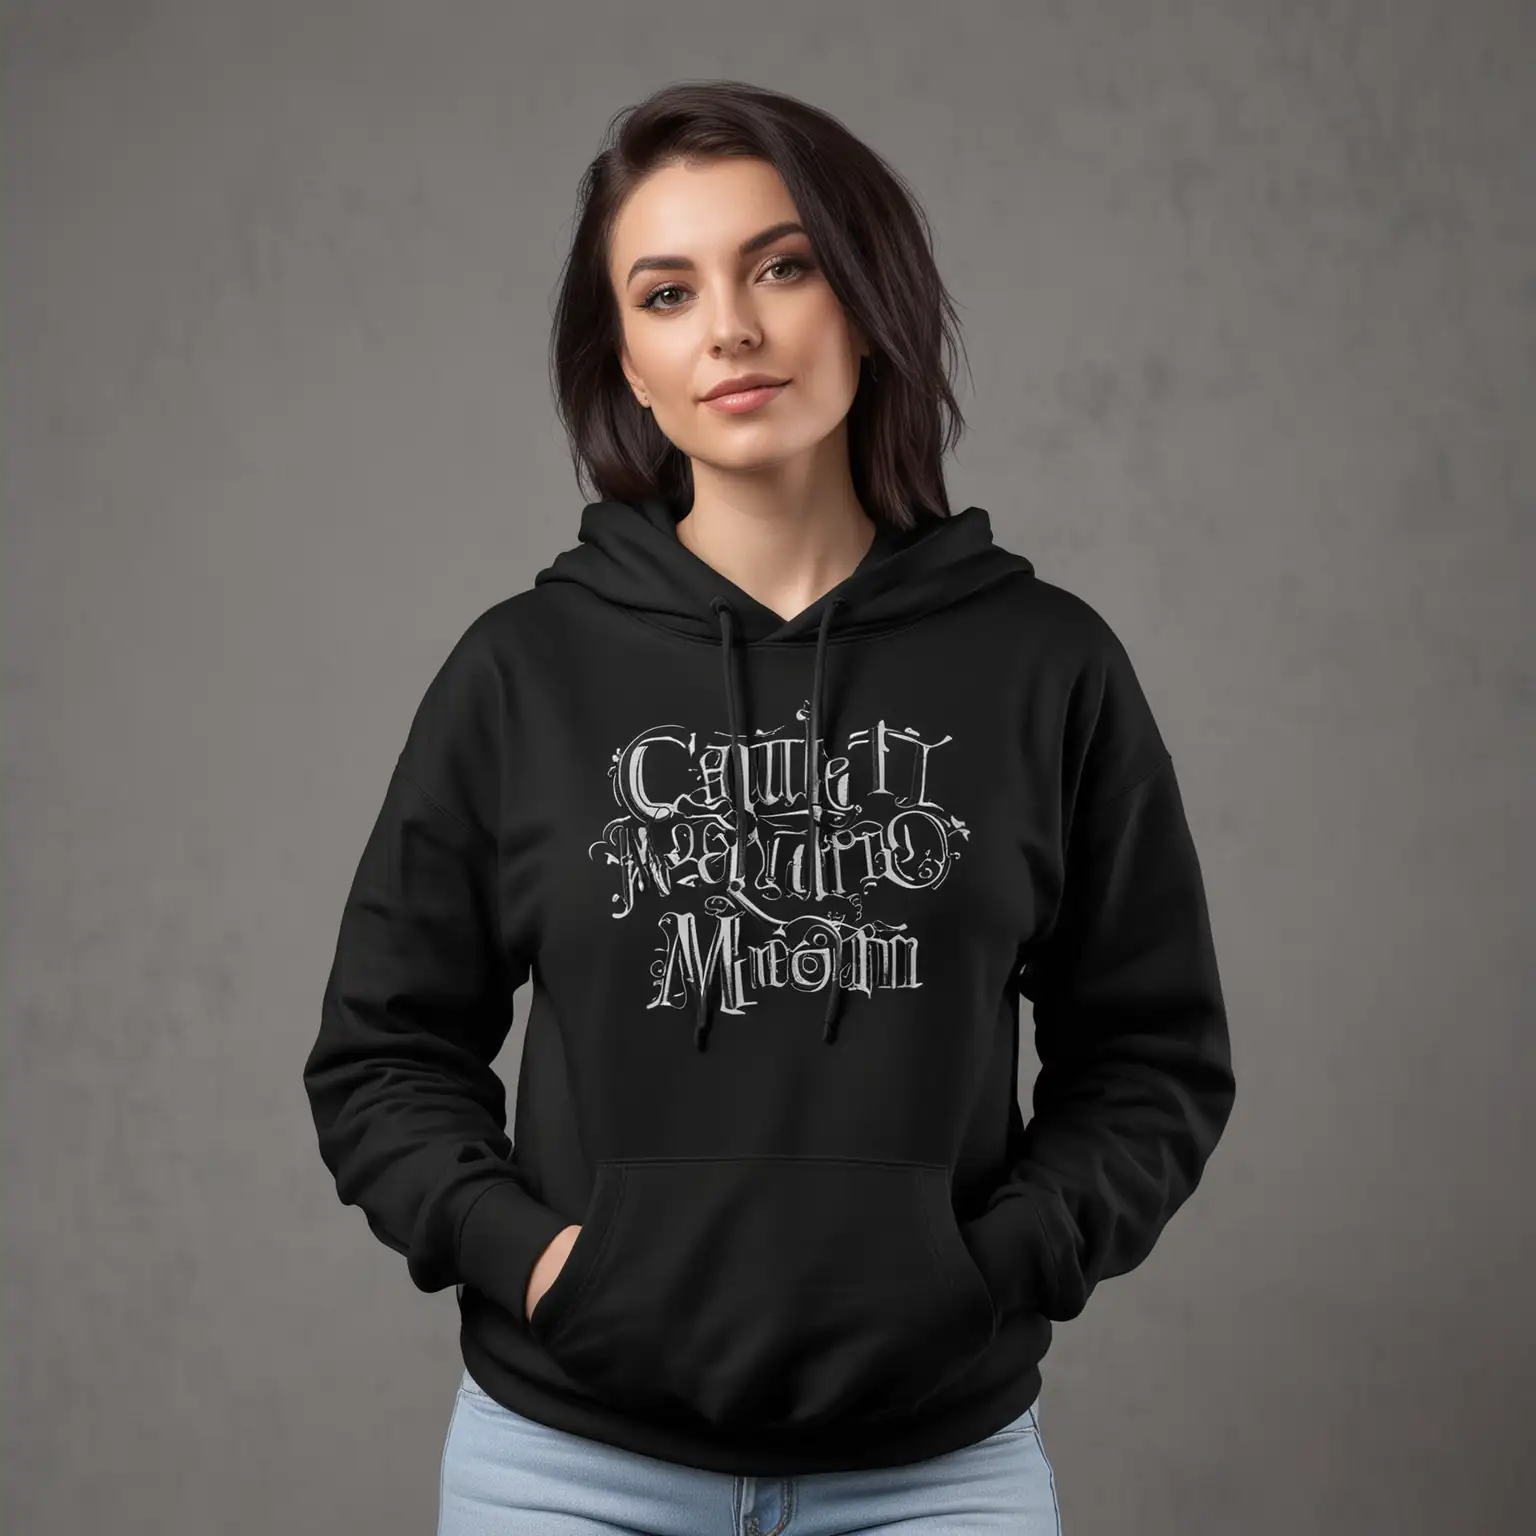 mockup for a black hoodie.  the model should be a female goth mom